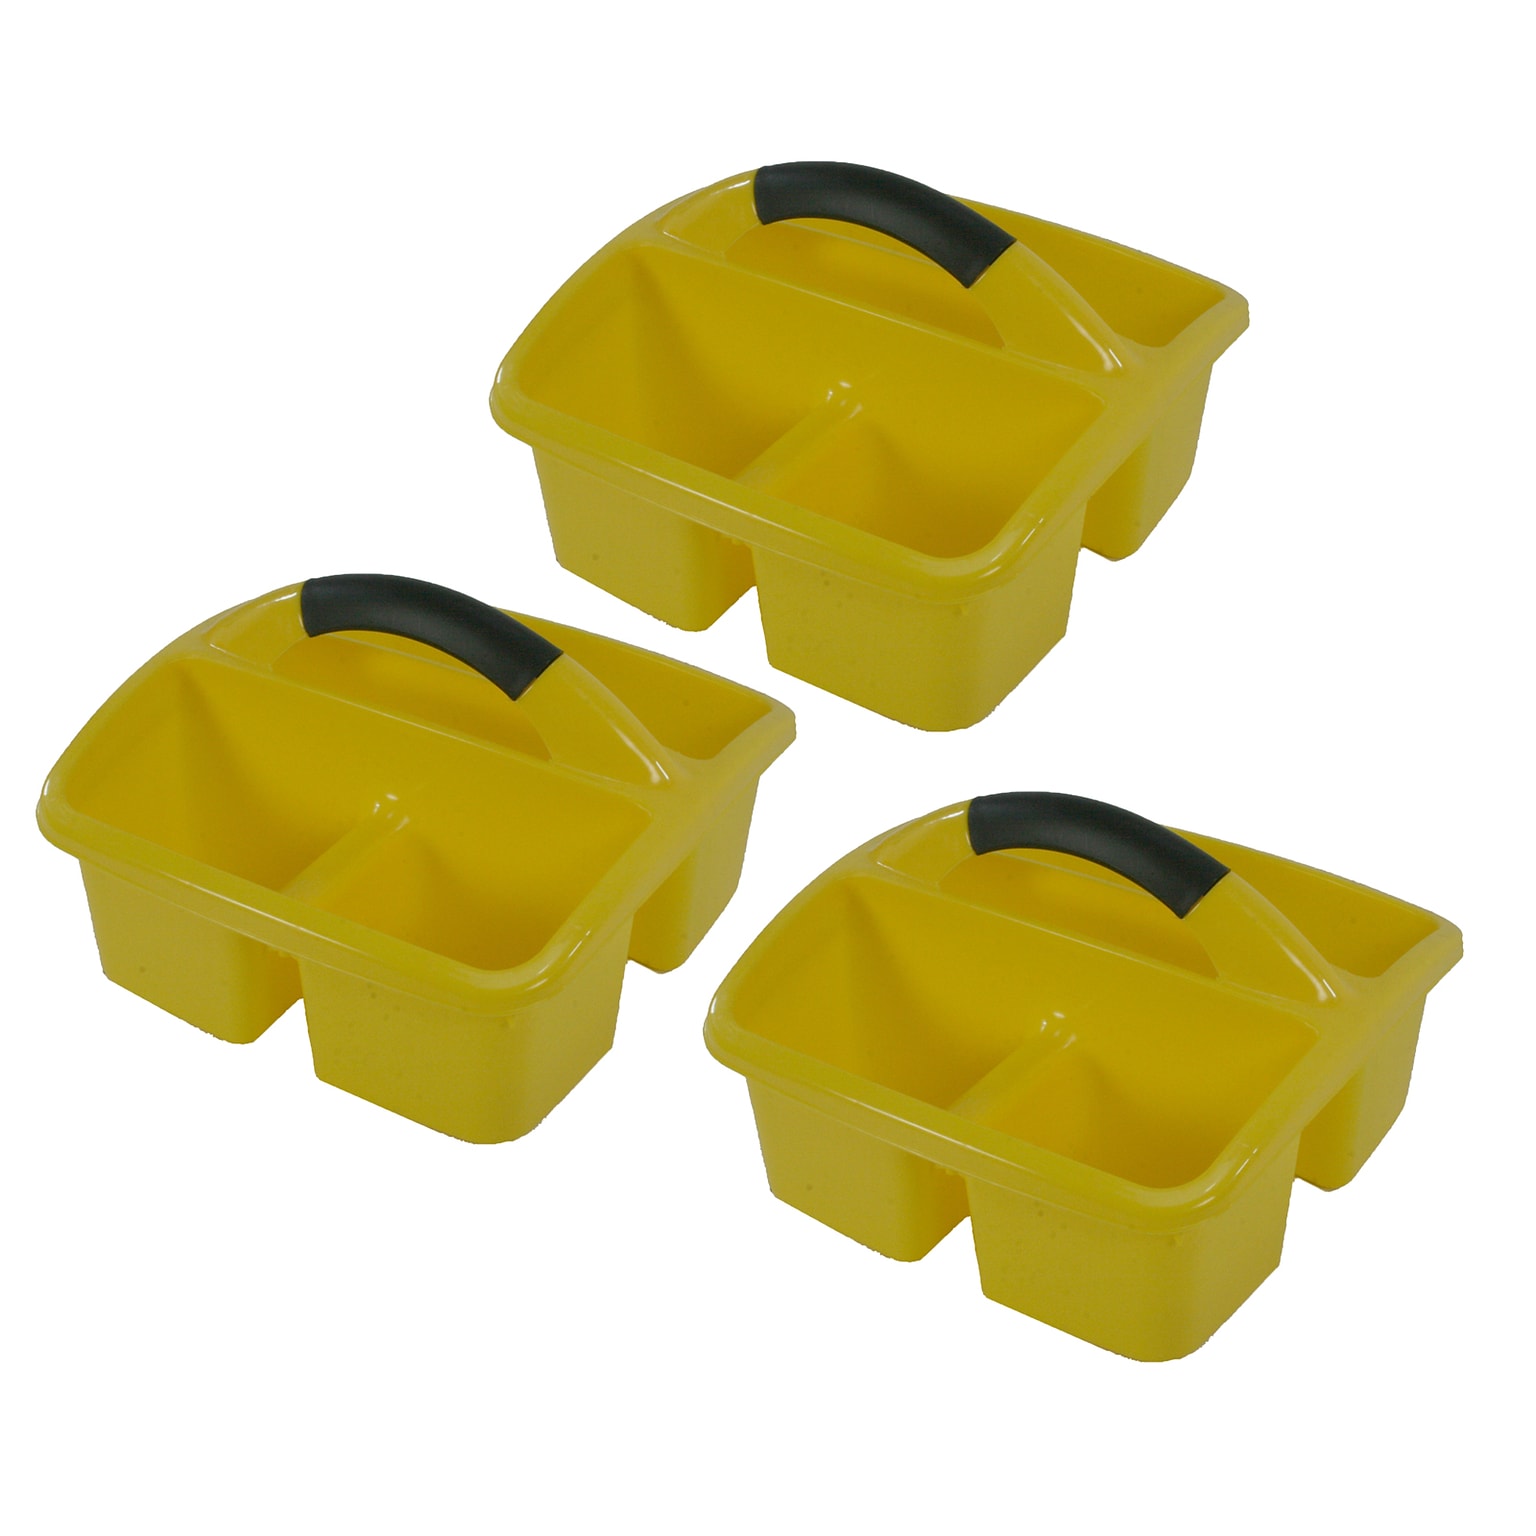 Romanoff Polypropylene Deluxe Small Utility Caddy, 9.5 x 9.5 x 6.5, Yellow, Pack of 3 (ROM26903-3)